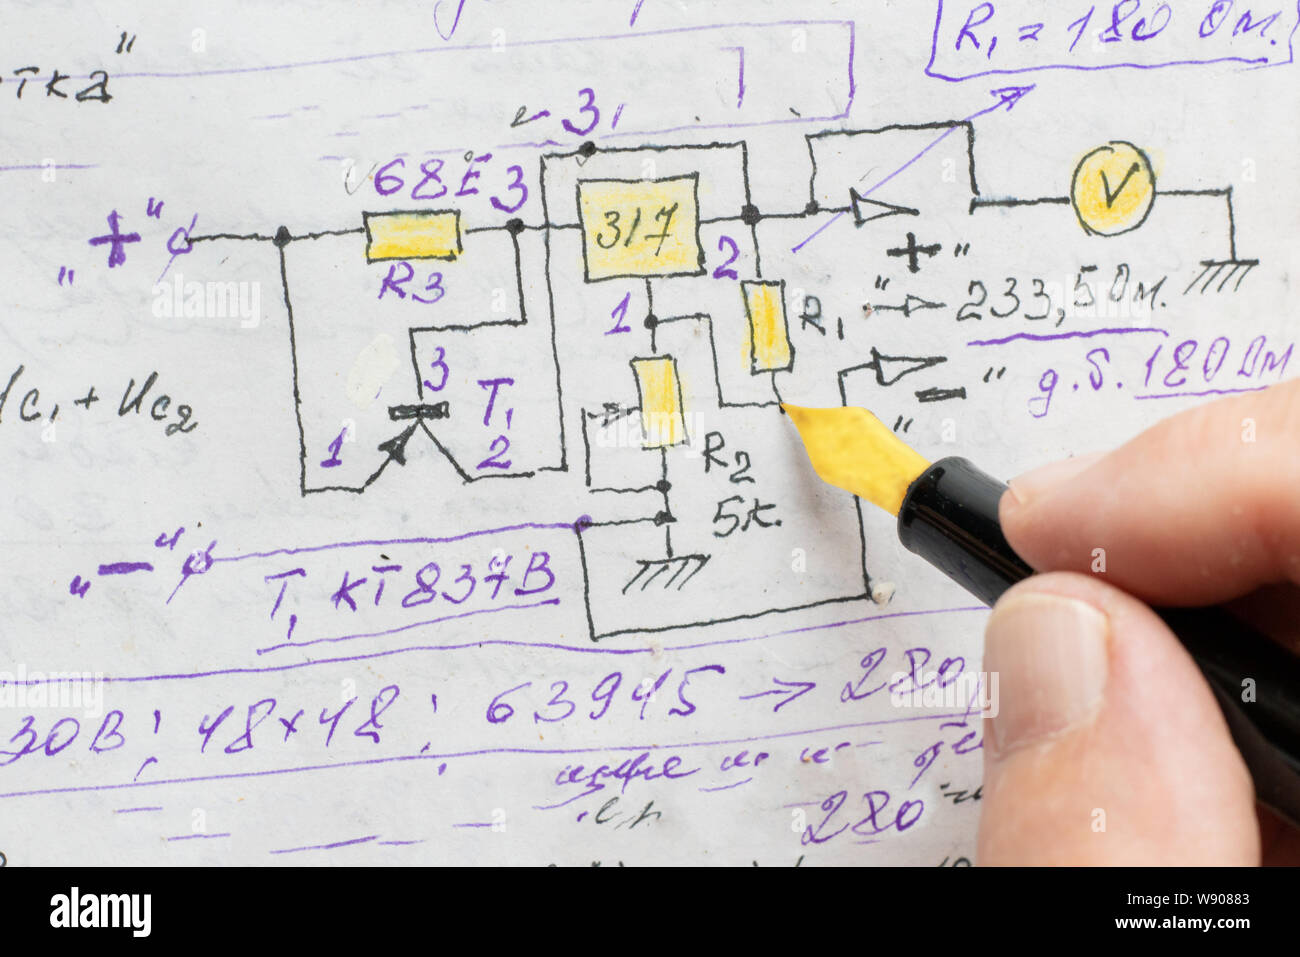 macro view of engineer planing the electrical circuit on paper Stock Photo